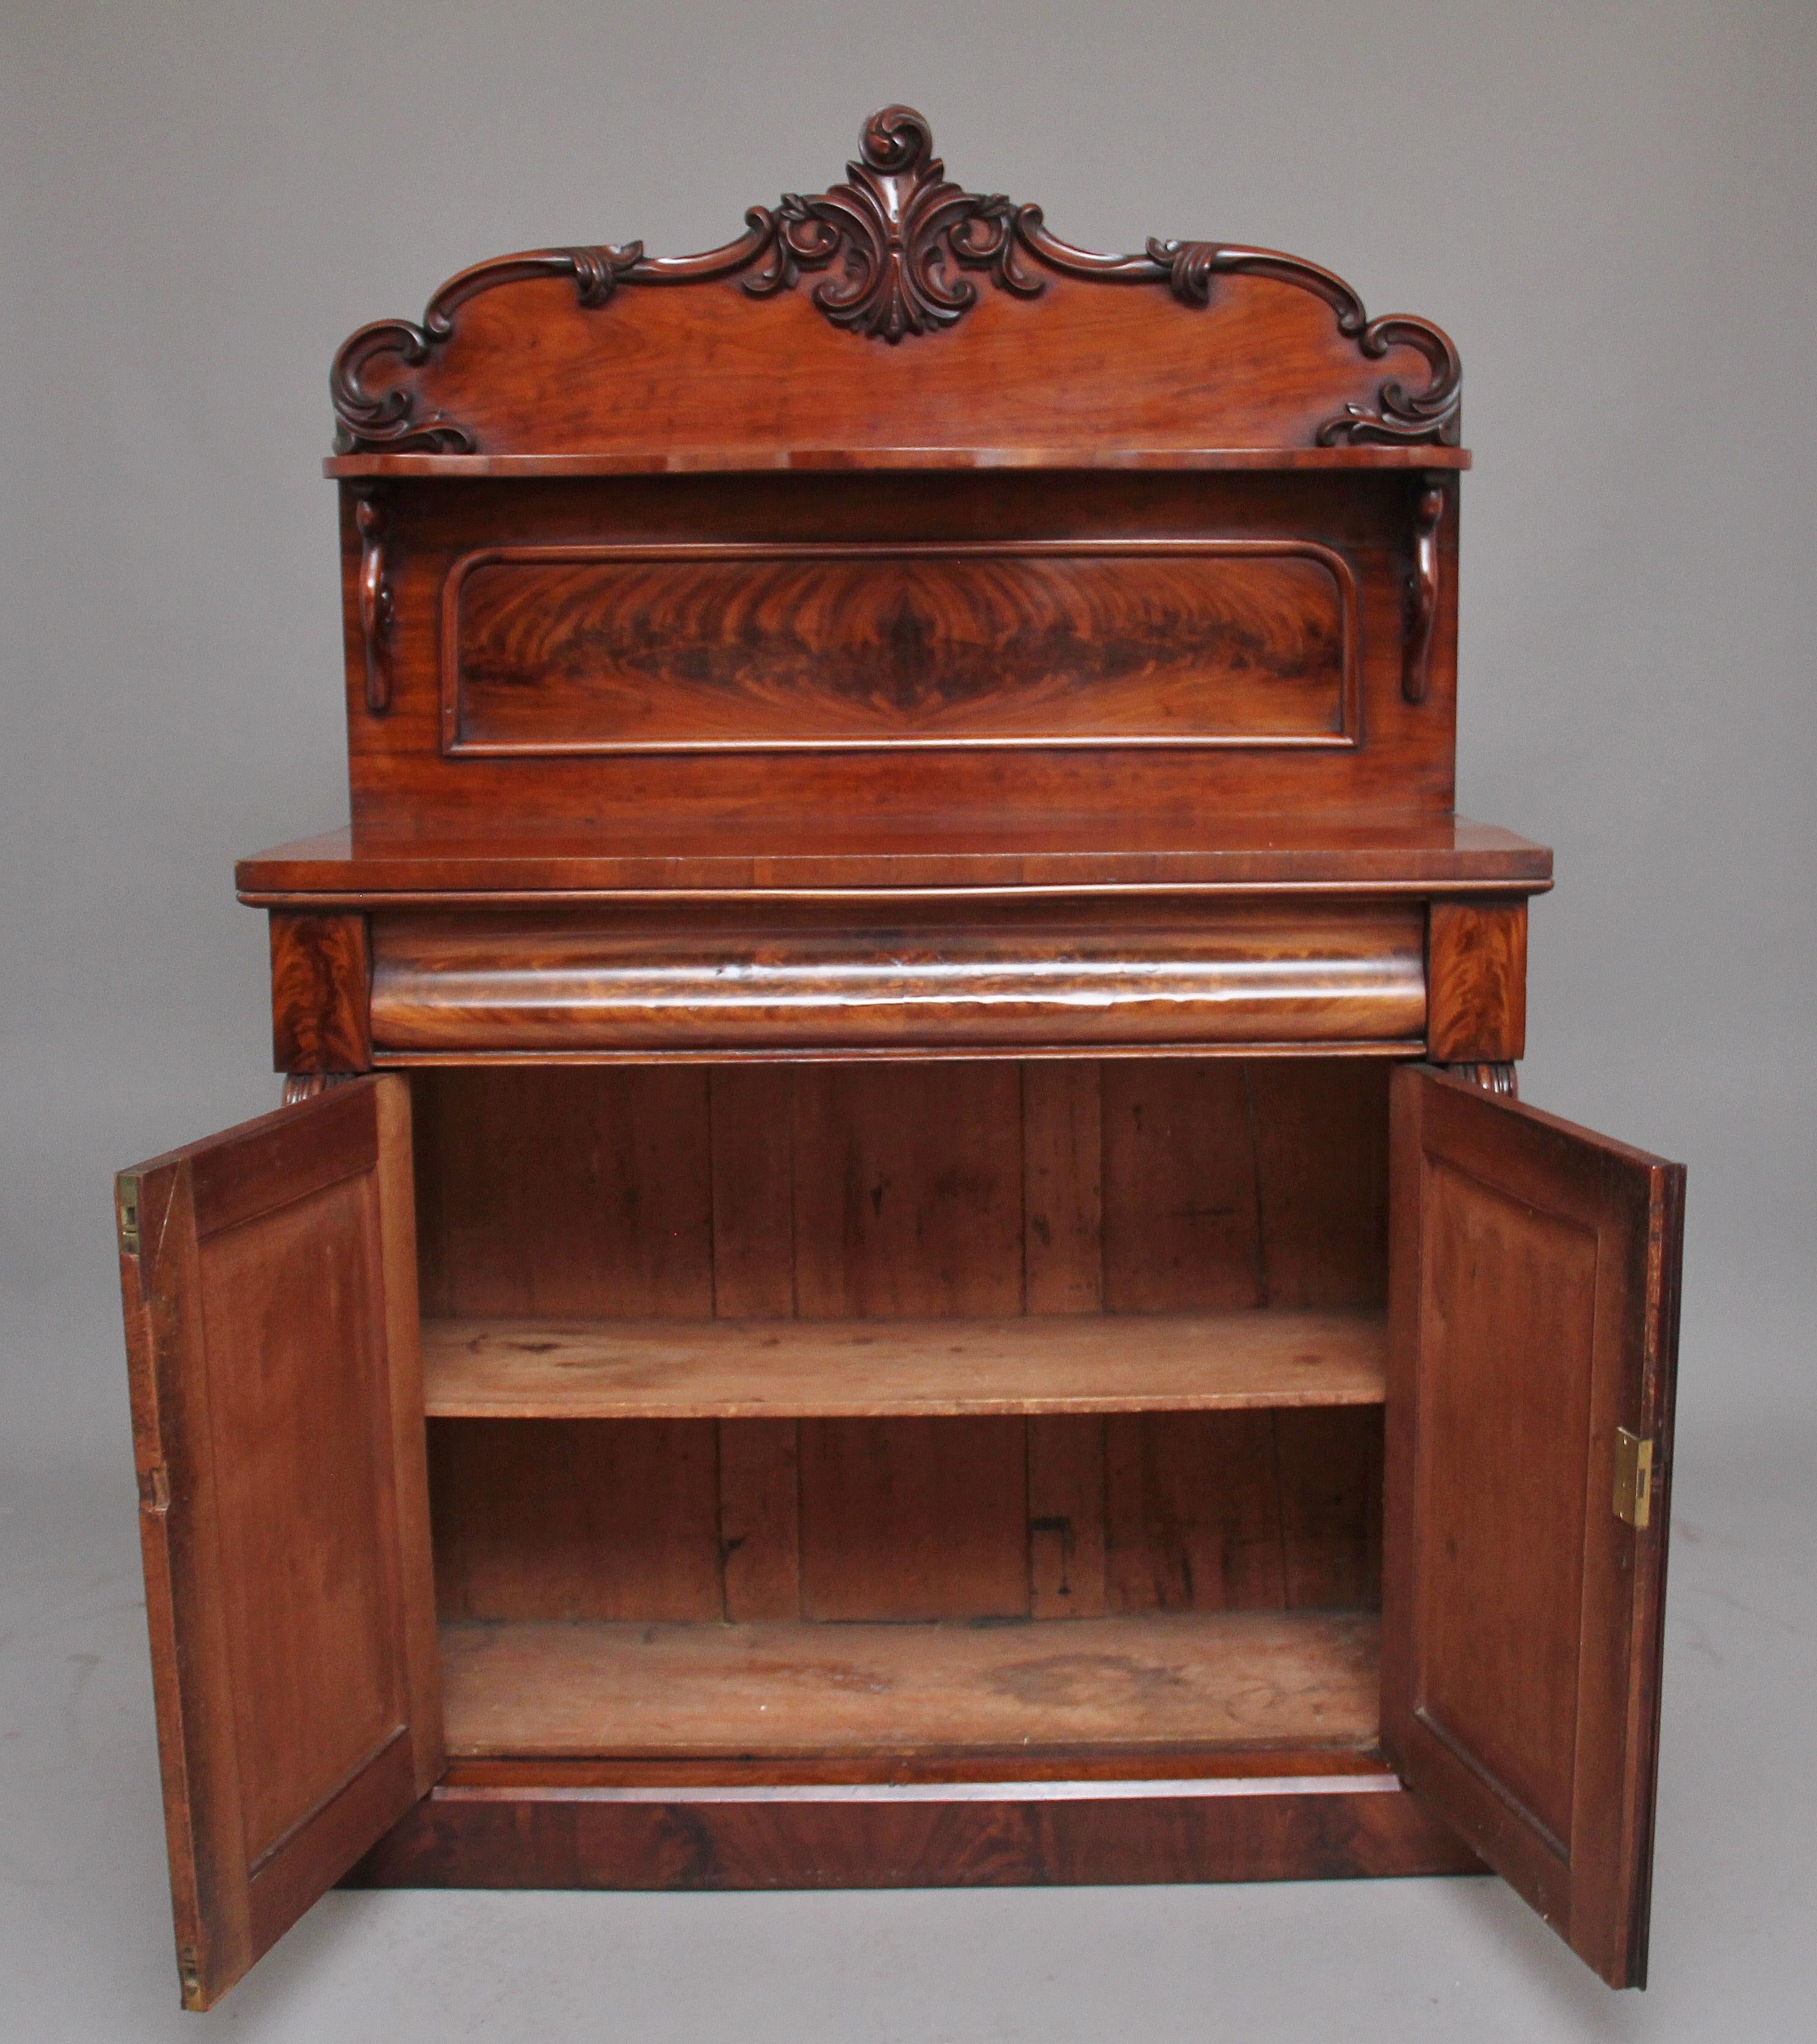 19th century flame mahogany chiffonier cabinet, having a shaped and moulded carved scrolled pediment above a shaped shelf with a flame mahogany panel below, the base having single mahogany lined frieze drawer above two flame mahogany paneled doors